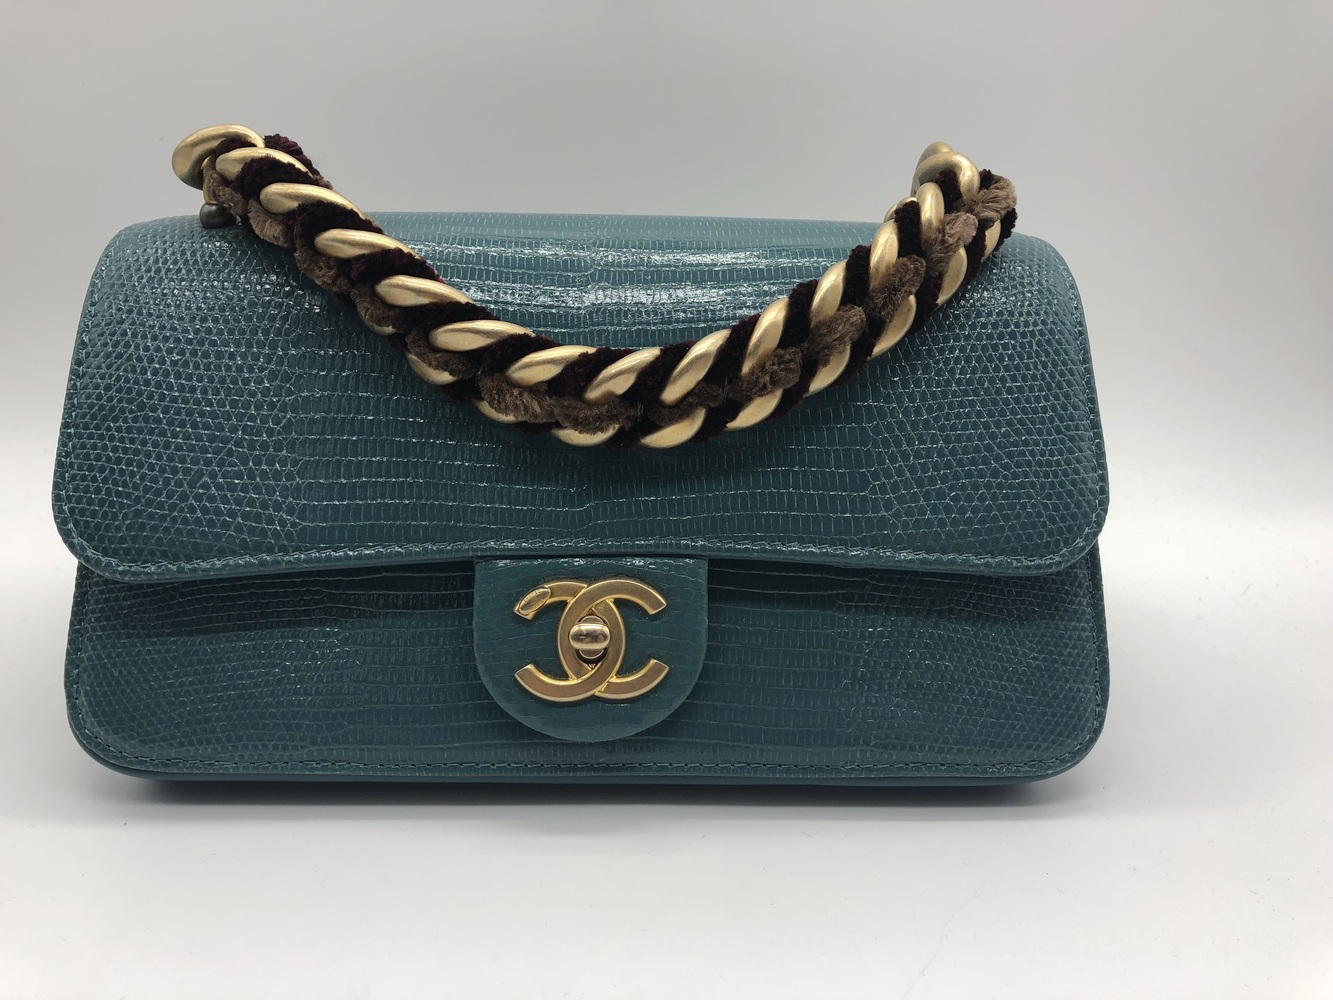 Rare EXOTIC Chanel Straight Lined Teal Lizard Mini Flap Shoulder